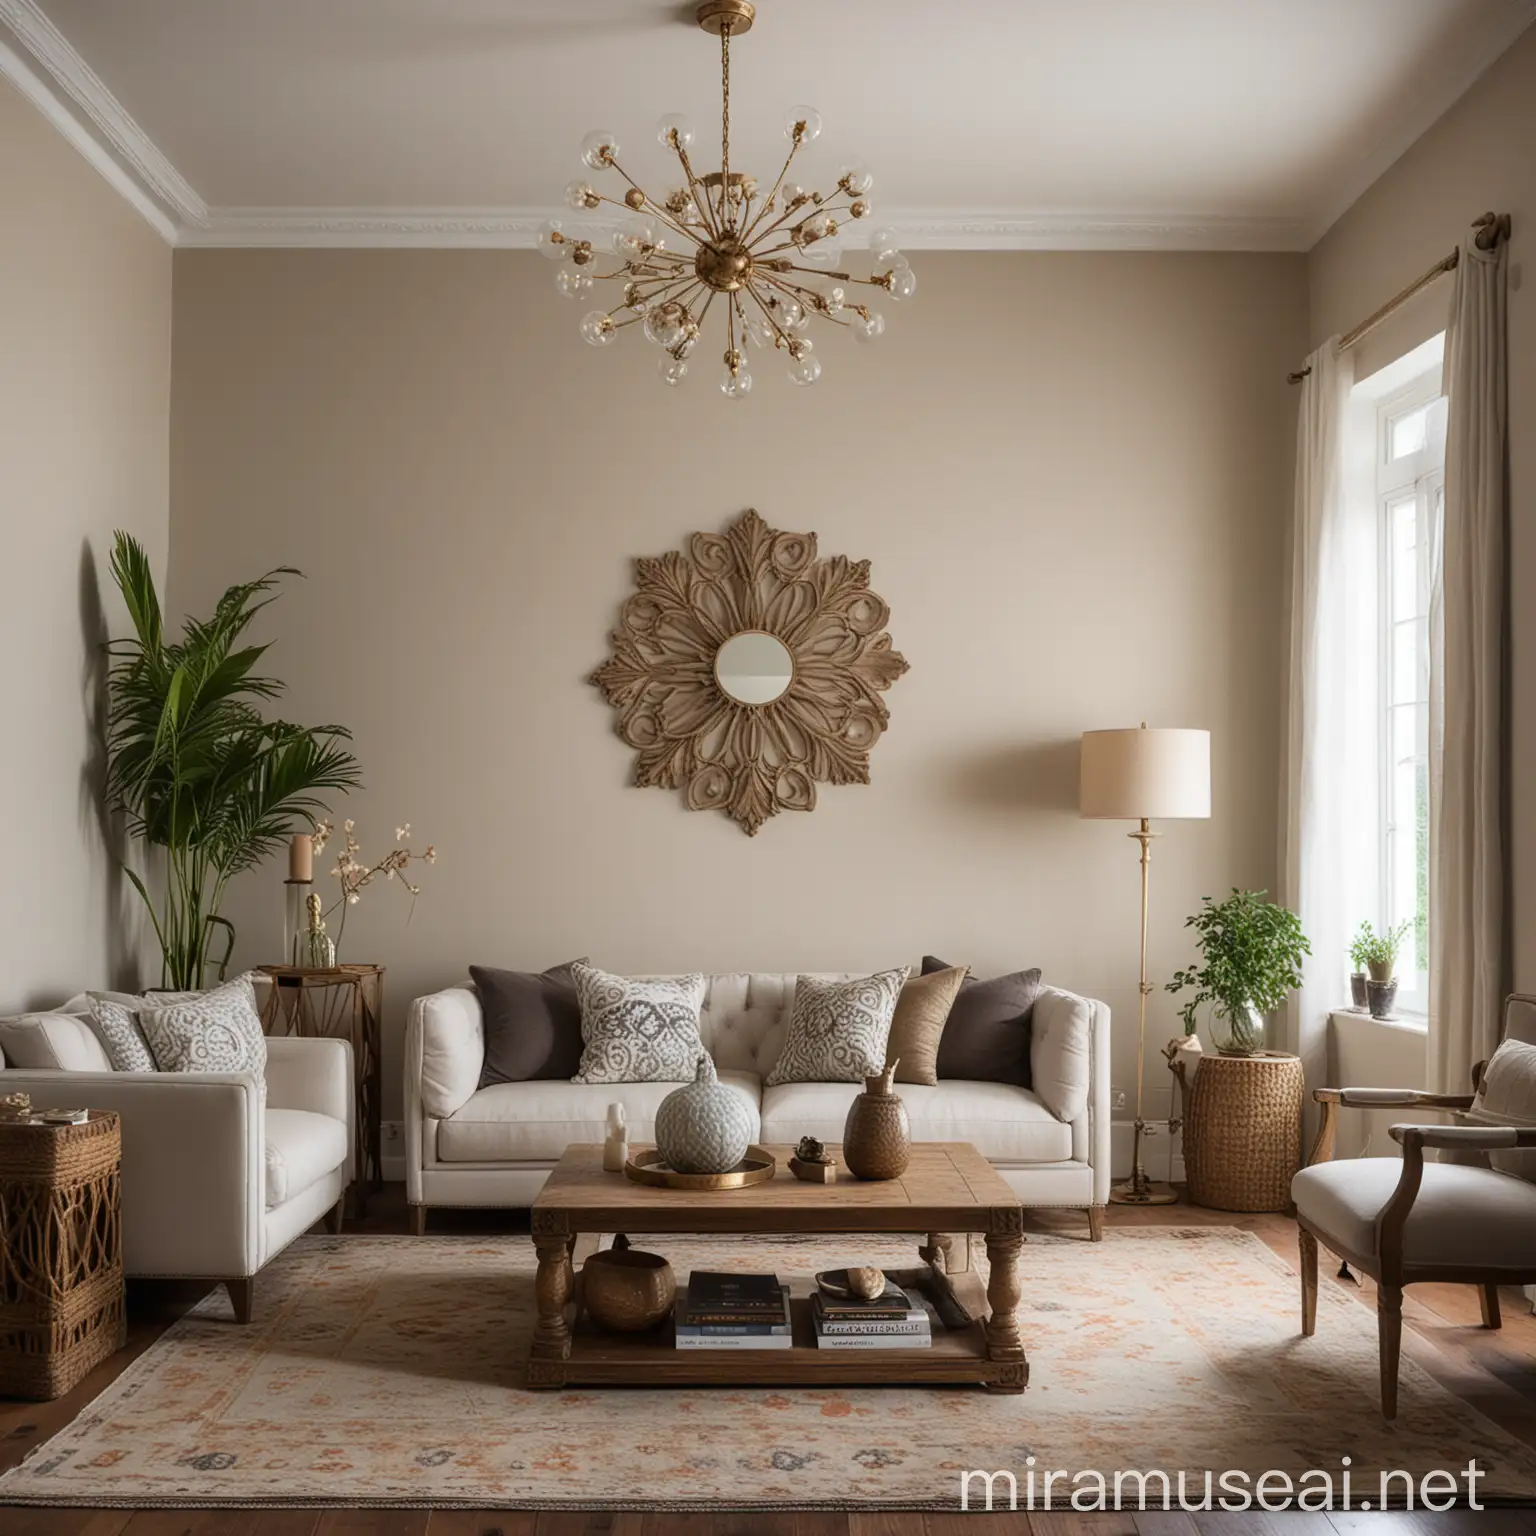 Handcrafted Living Room Decor Elegant Interior Design with Artisan Accessories and Lighting